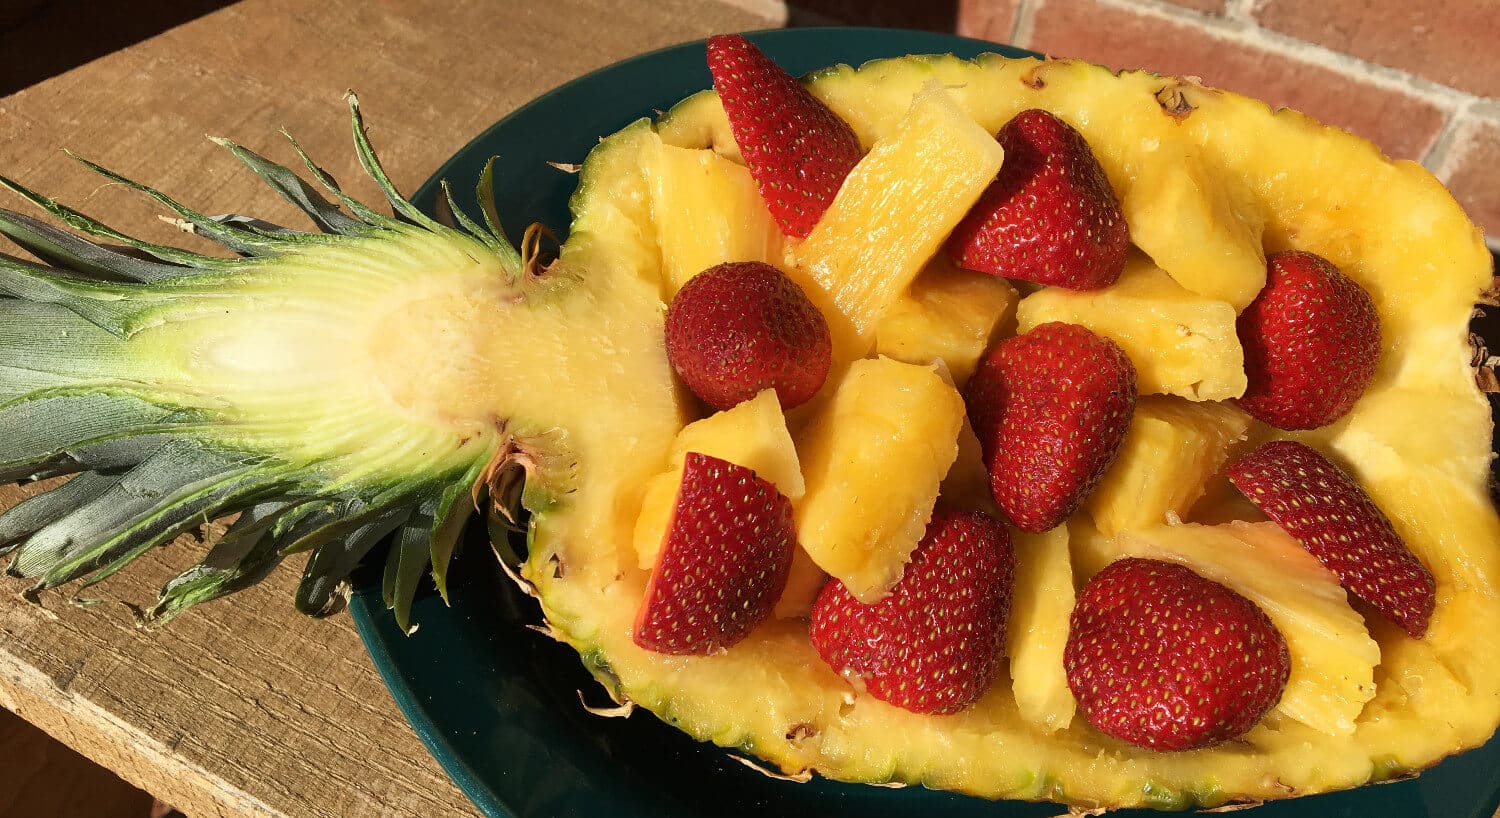 Half a pineapple filled with juicy yellow pineapple chunks and cut up red strawberries